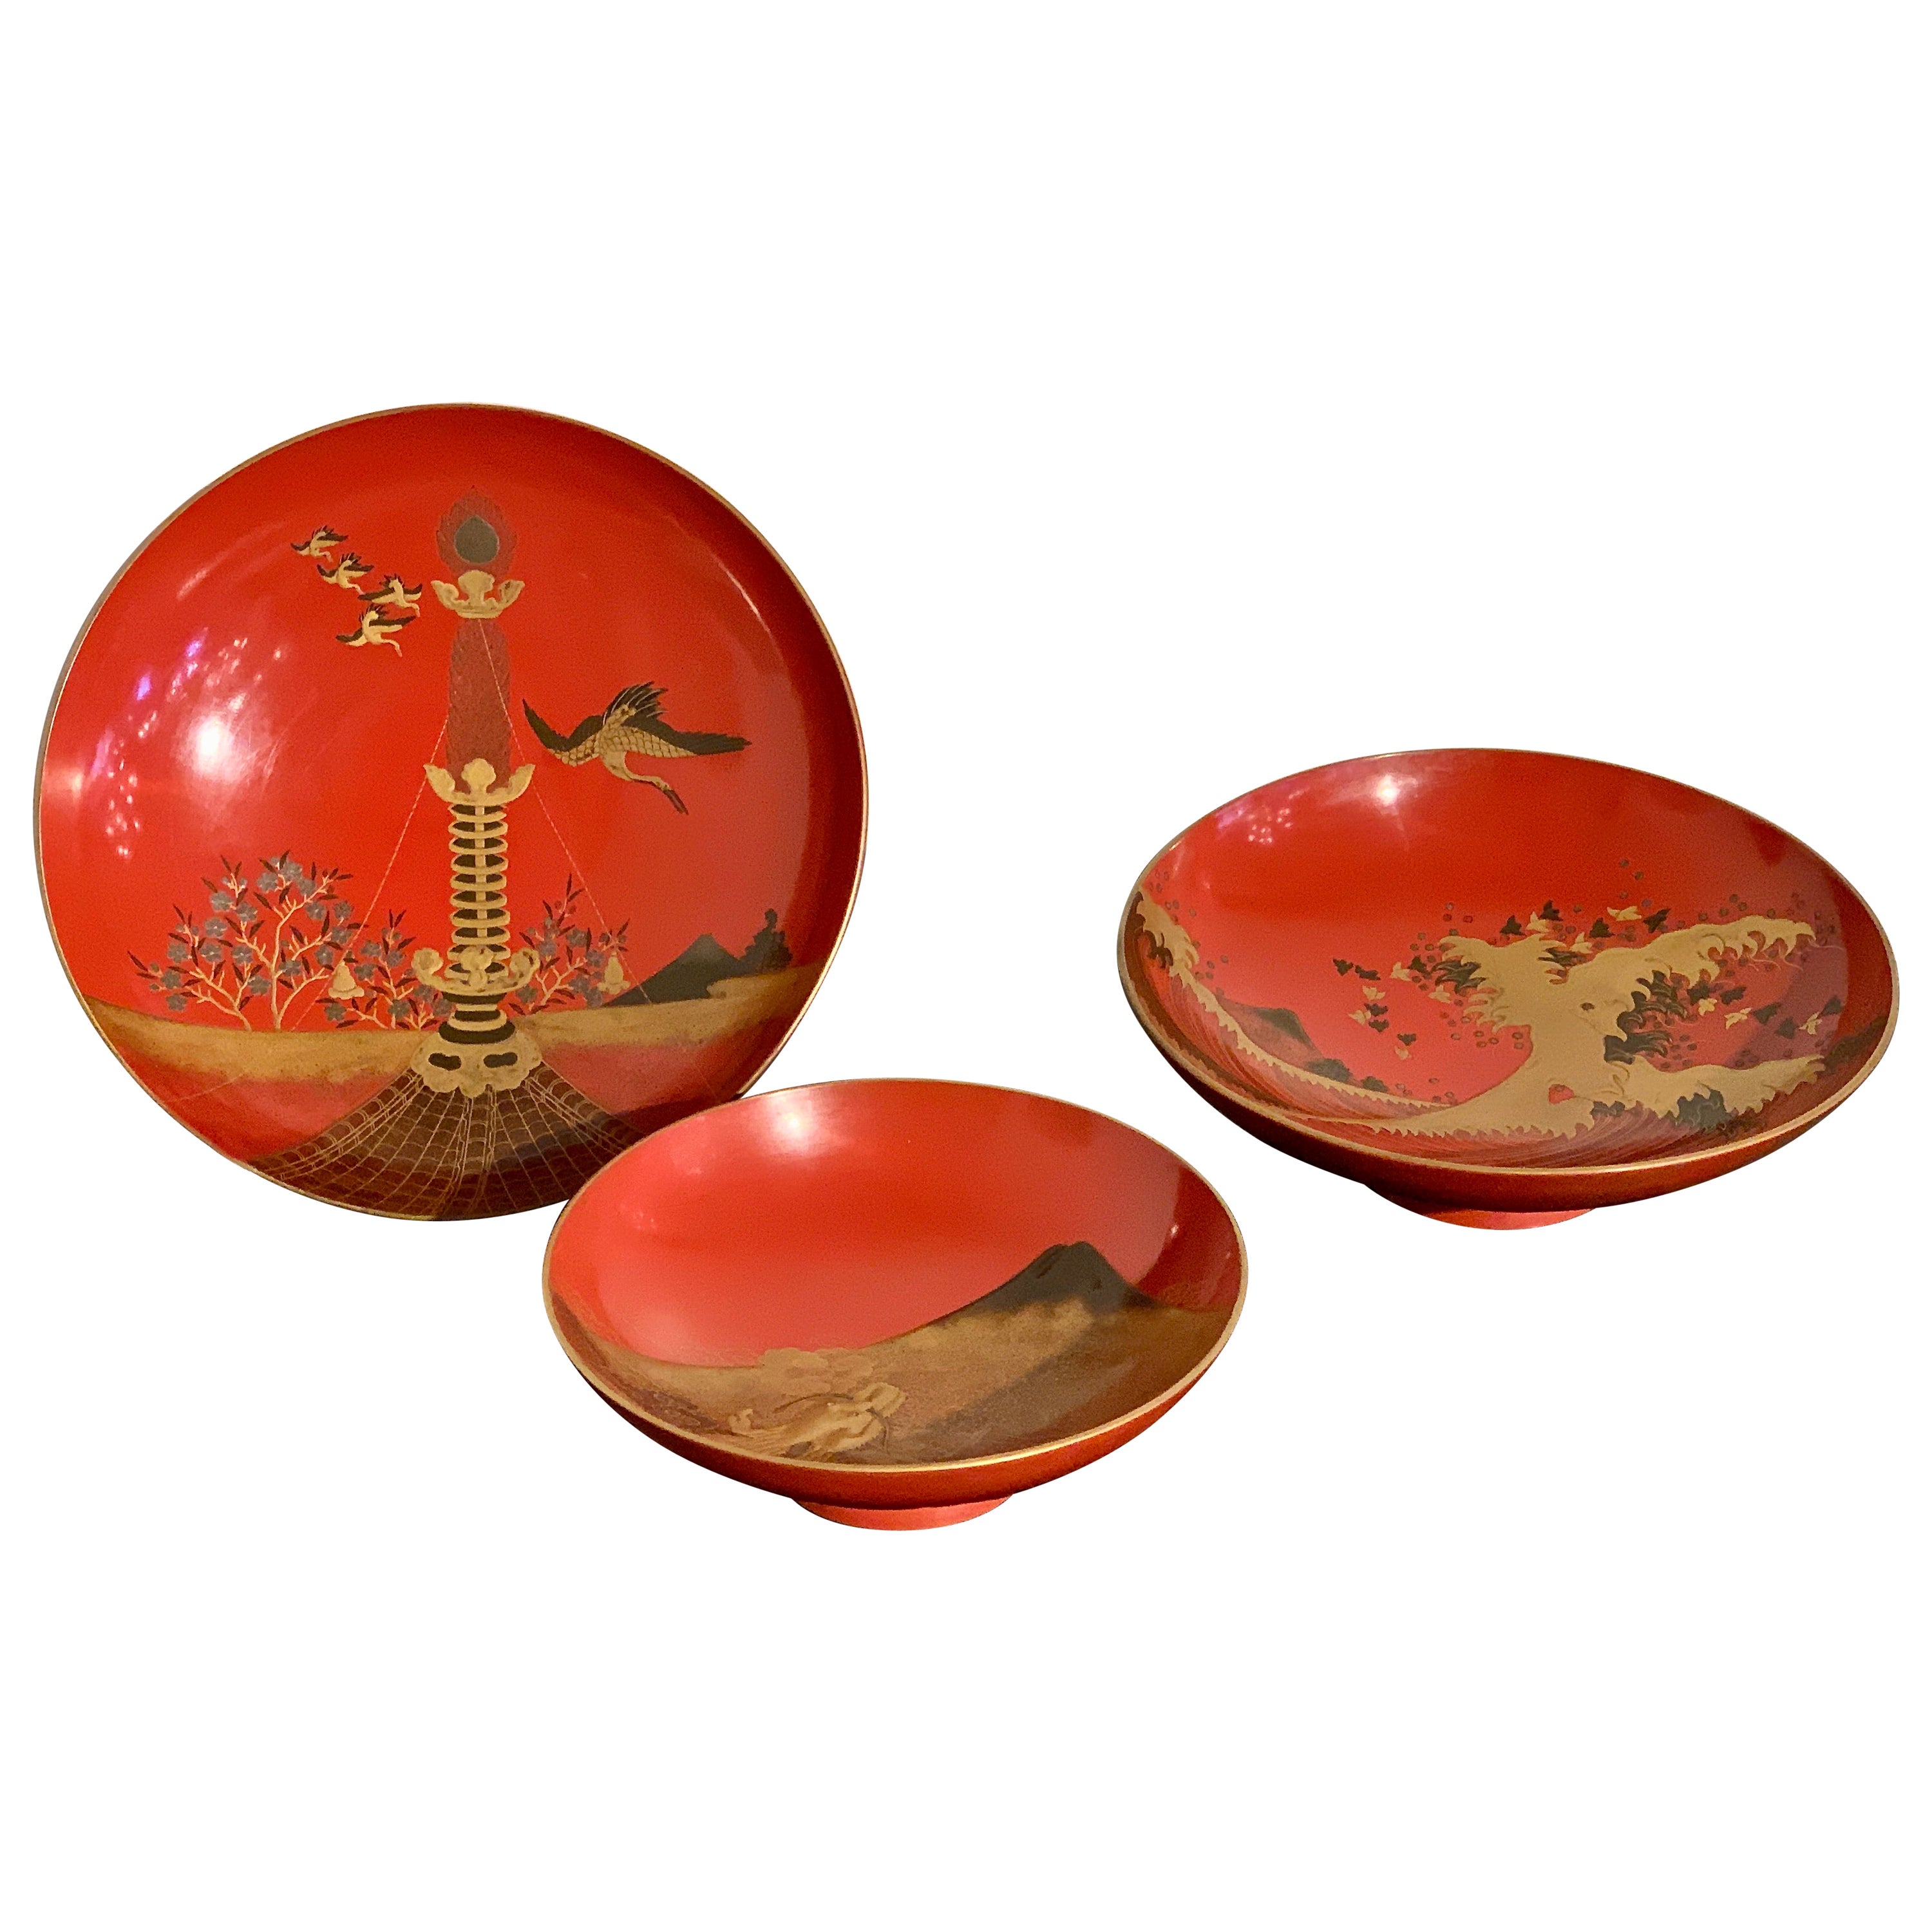 Japanese Lacquer Sake Cups, Set of 3, Meiji Period, Early 20th Century, Japan For Sale